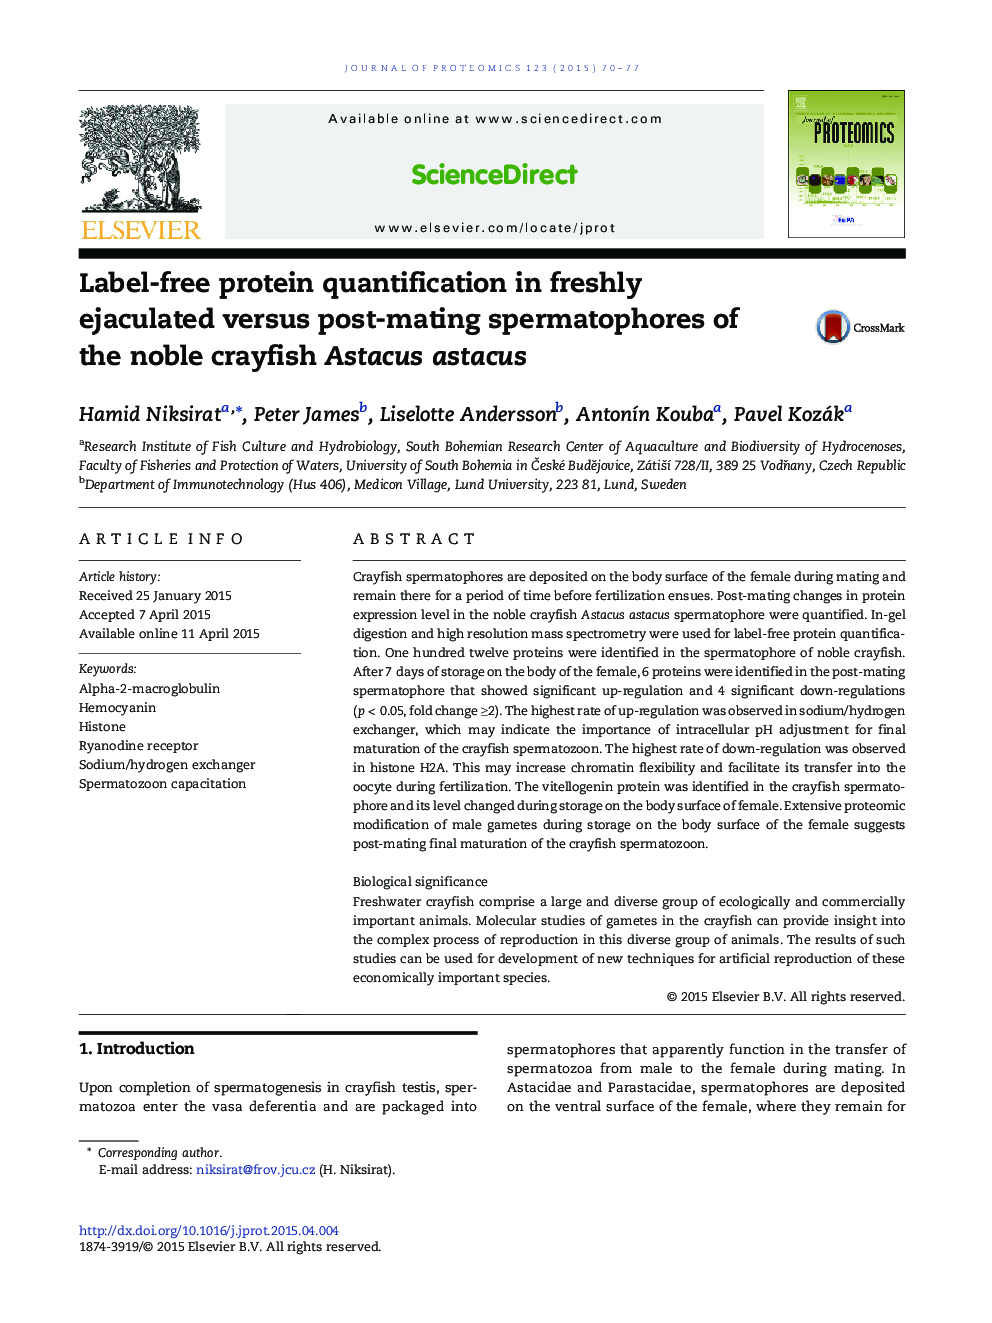 Label-free protein quantification in freshly ejaculated versus post-mating spermatophores of the noble crayfish Astacus astacus